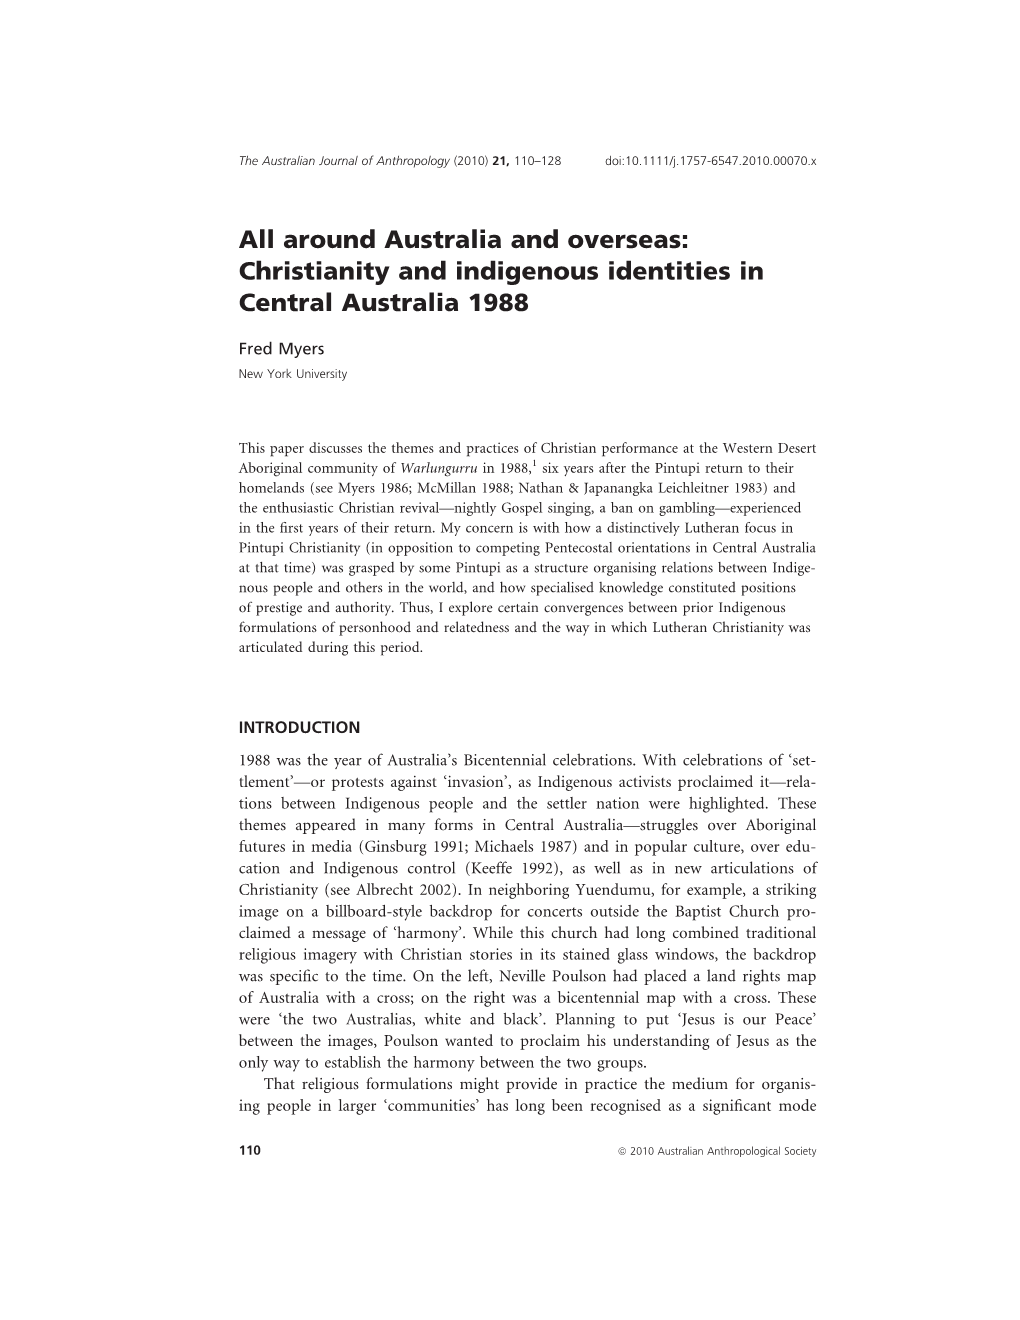 All Around Australia and Overseas: Christianity and Indigenous Identities in Central Australia 1988